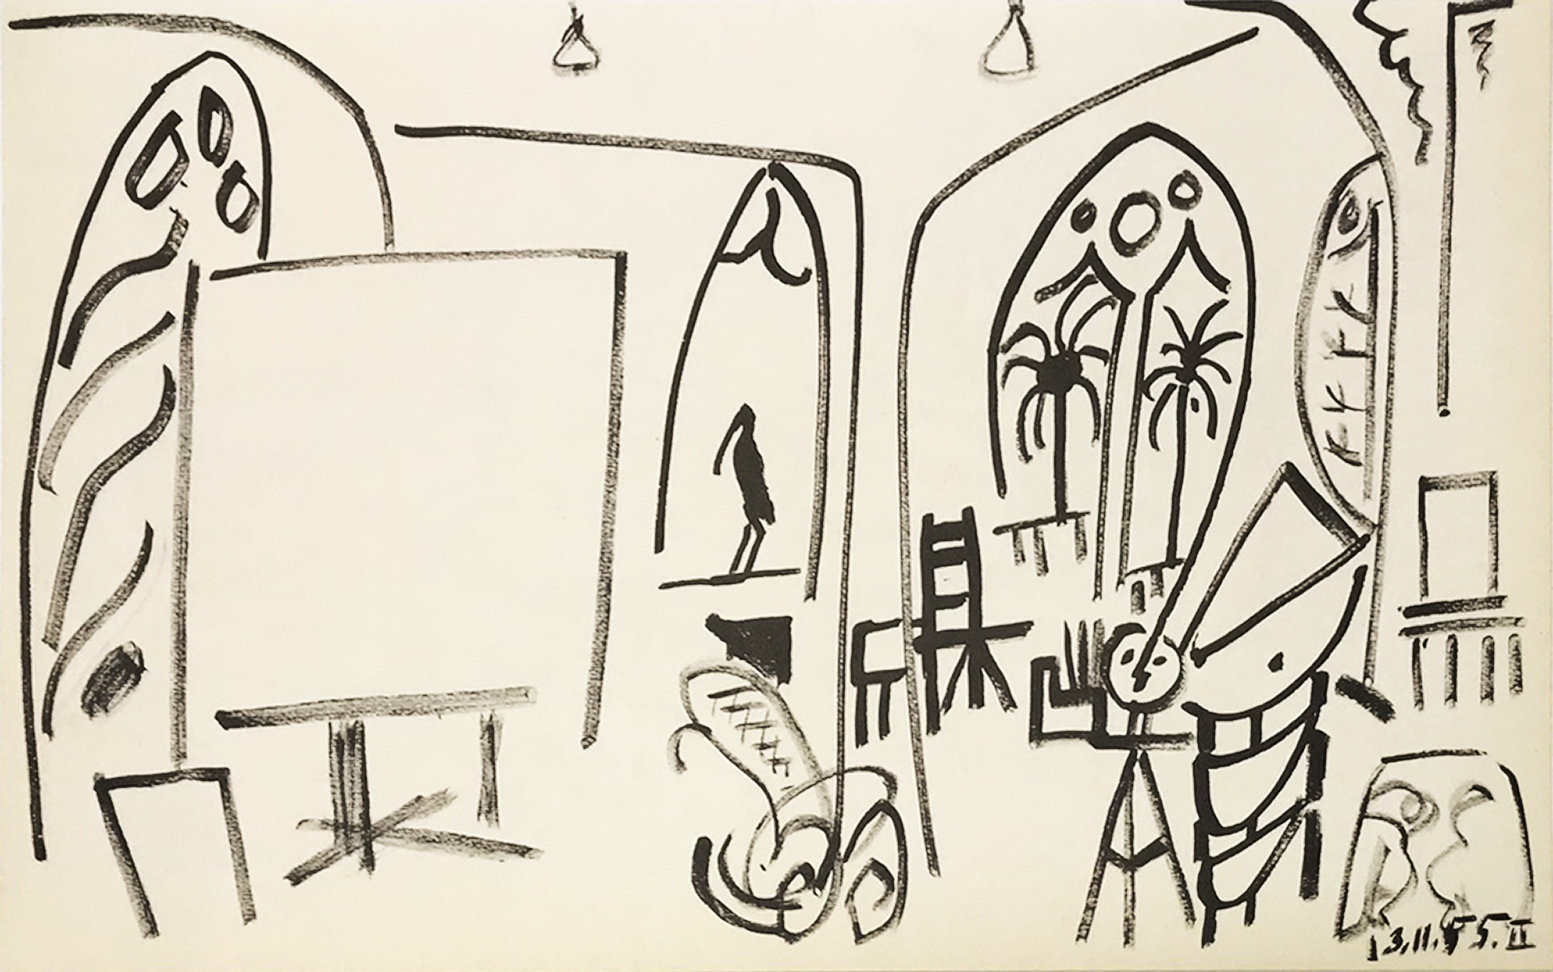 Picasso Sketchbook Lithograph No 2, dated 13/11/1955